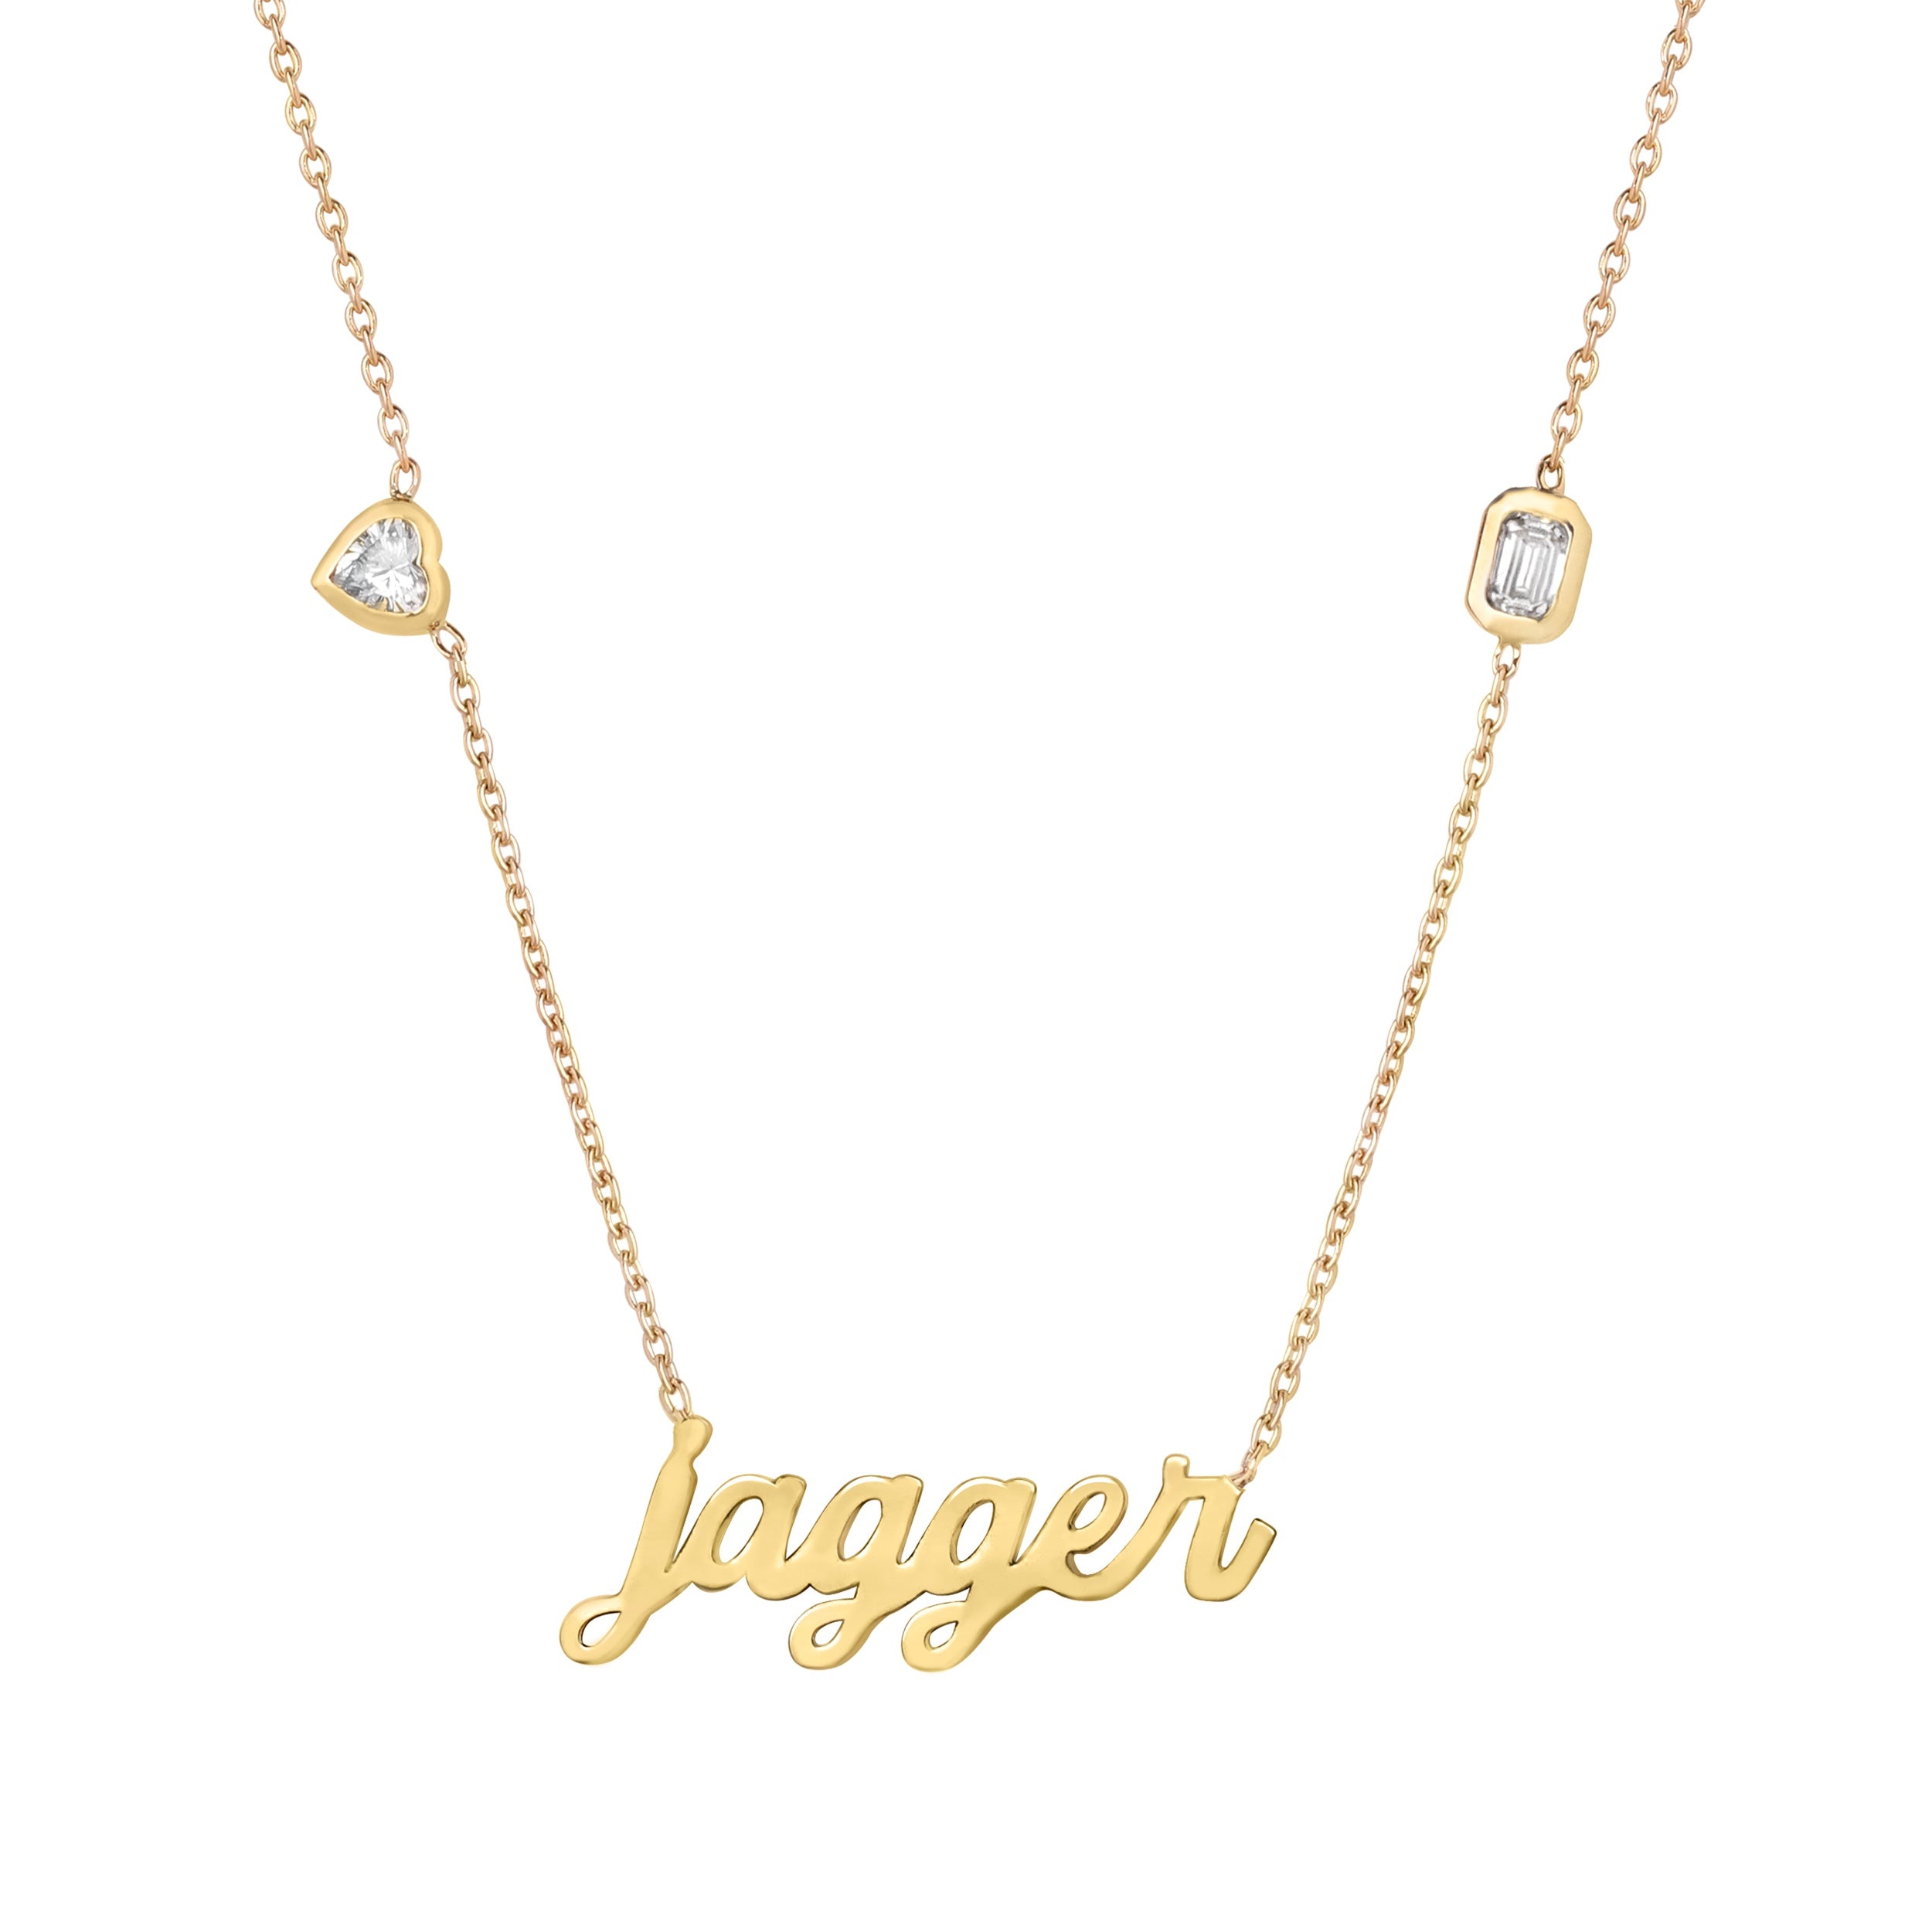 Small Name Necklace with Diamond Accent Stones